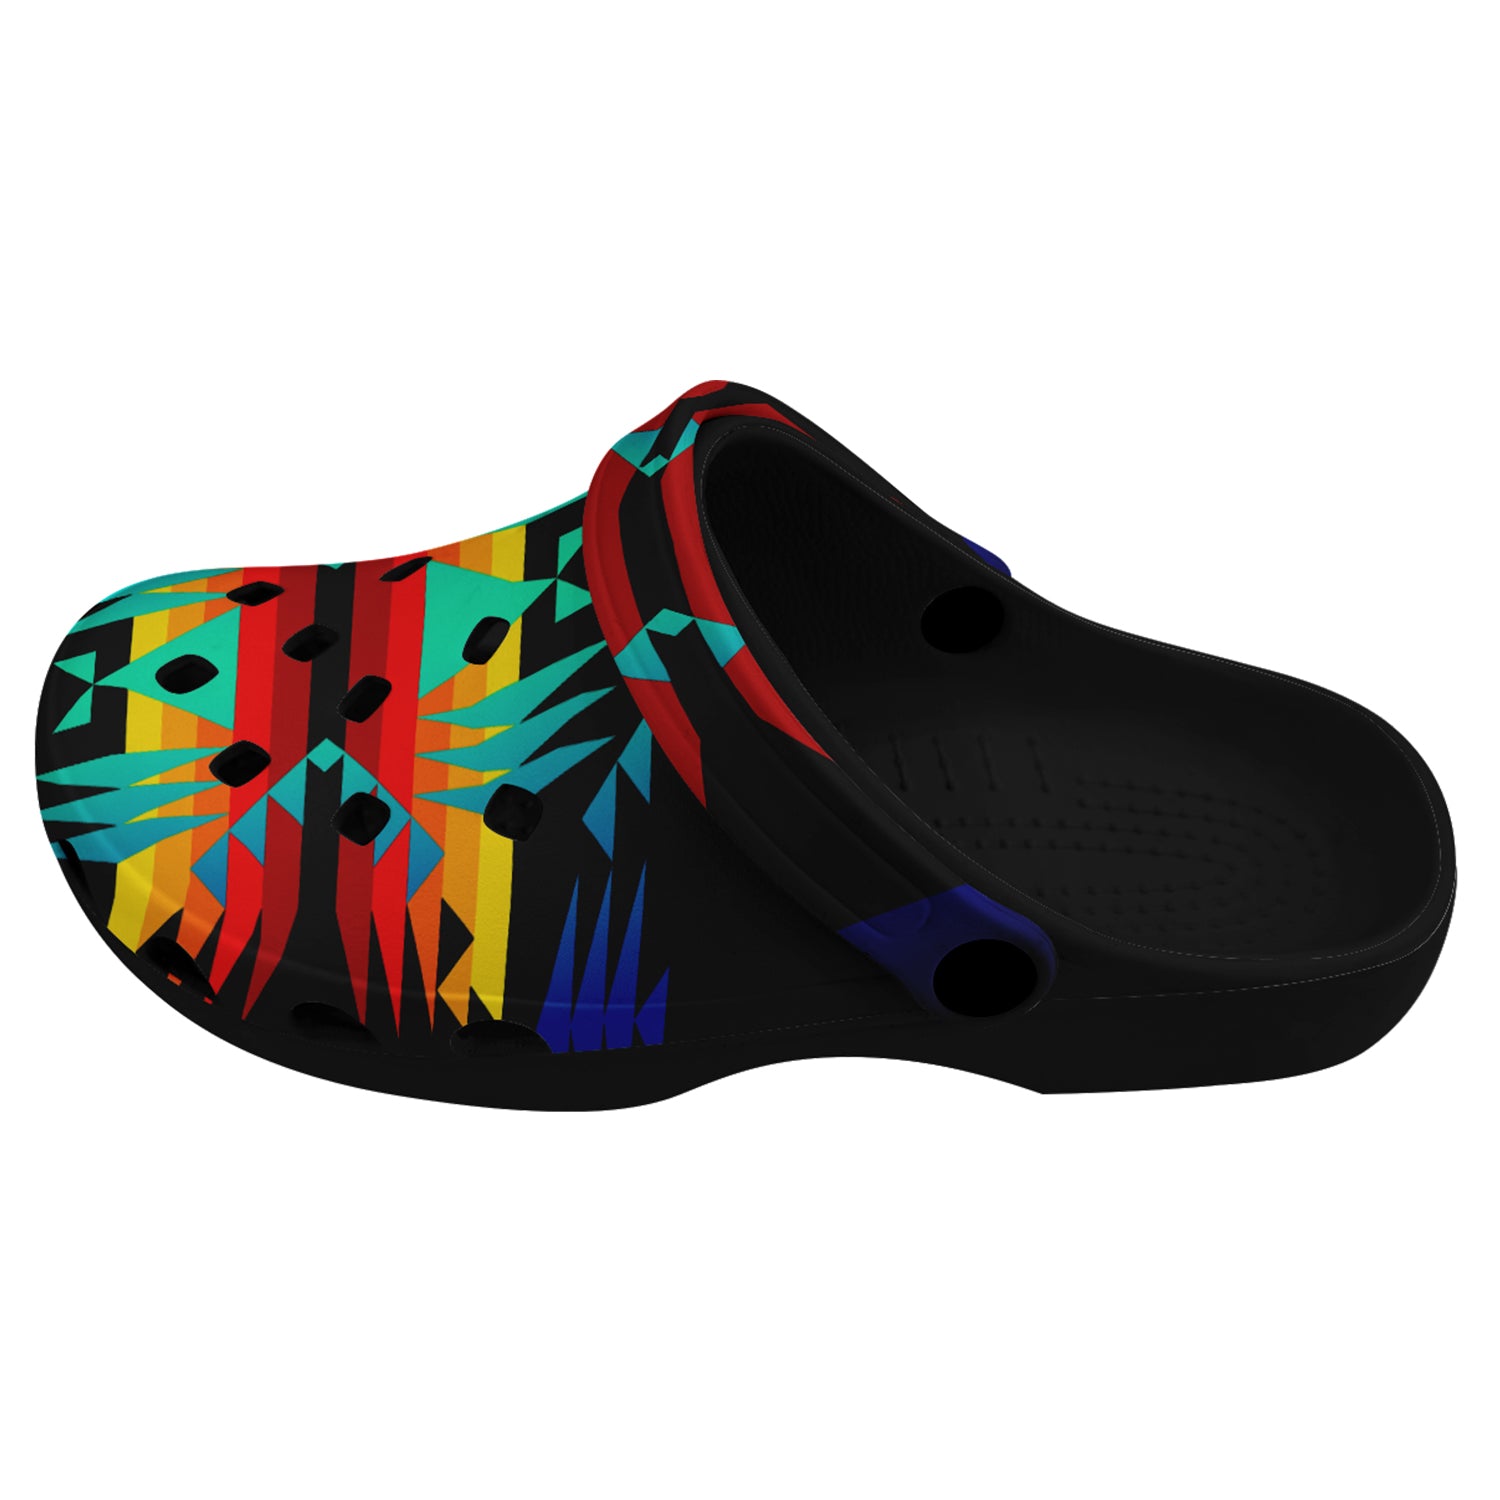 Between the Mountains Black Muddies Unisex Clog Shoes